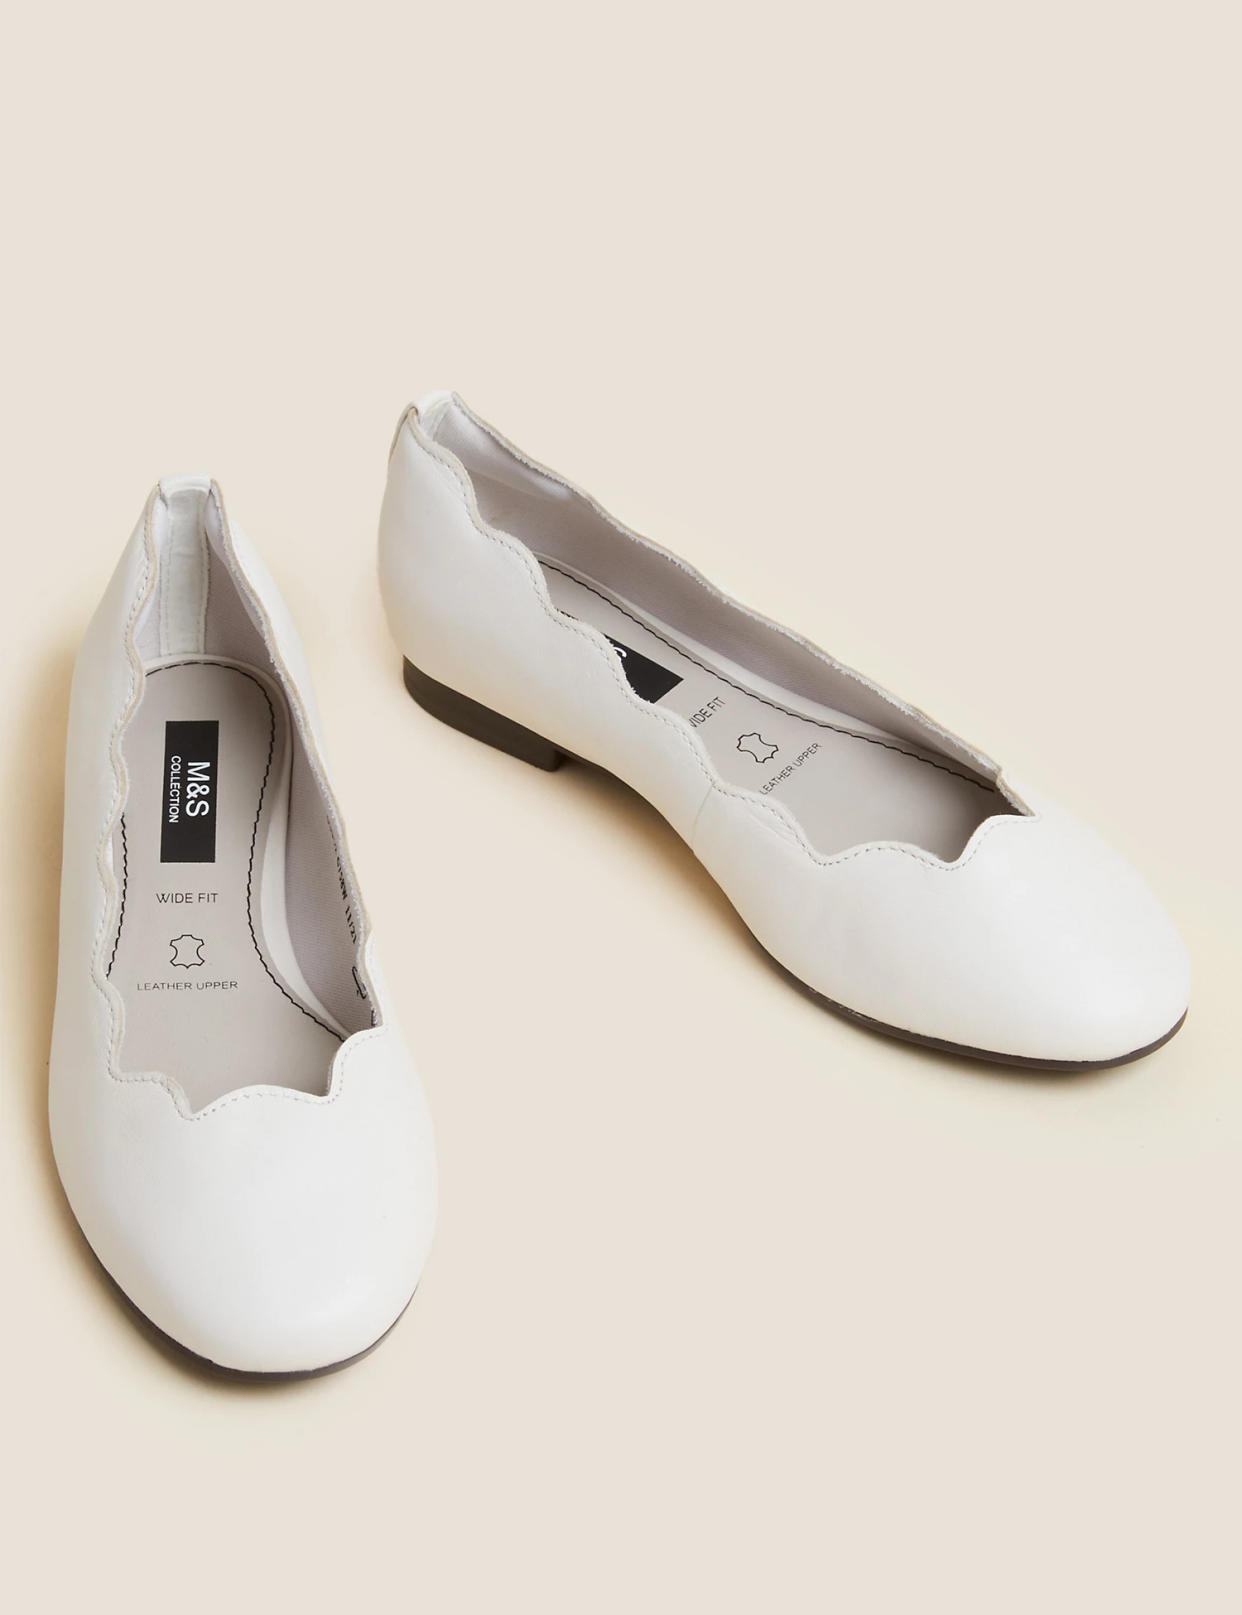 These pretty pumps with scalloped edges also come in black. (M&S)